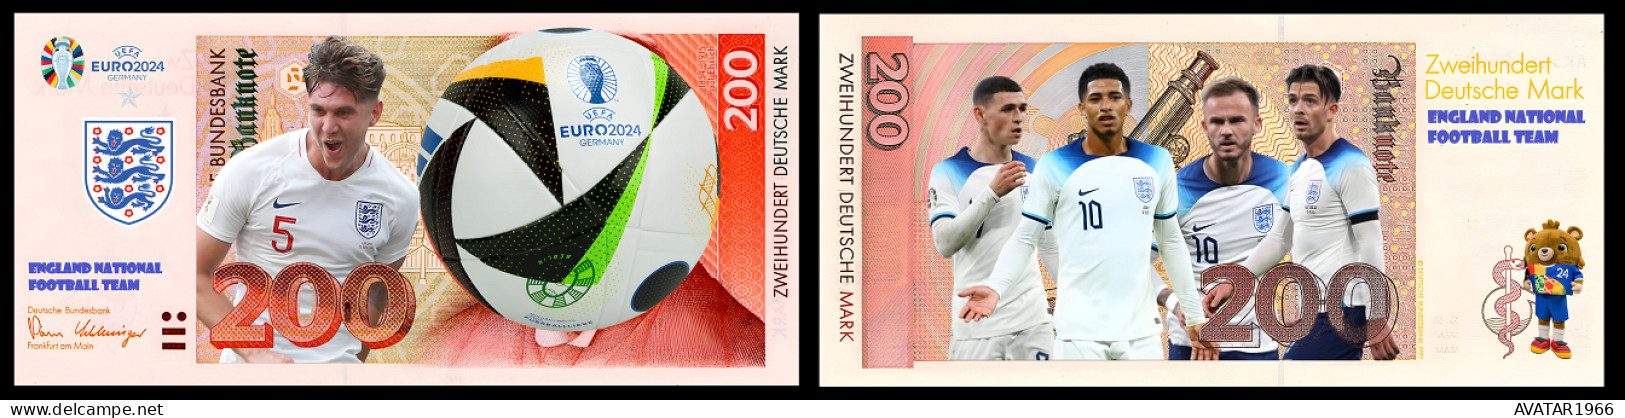 UEFA European Football Championship 2024 qualified country England 8 pieces Germany fantasy paper money